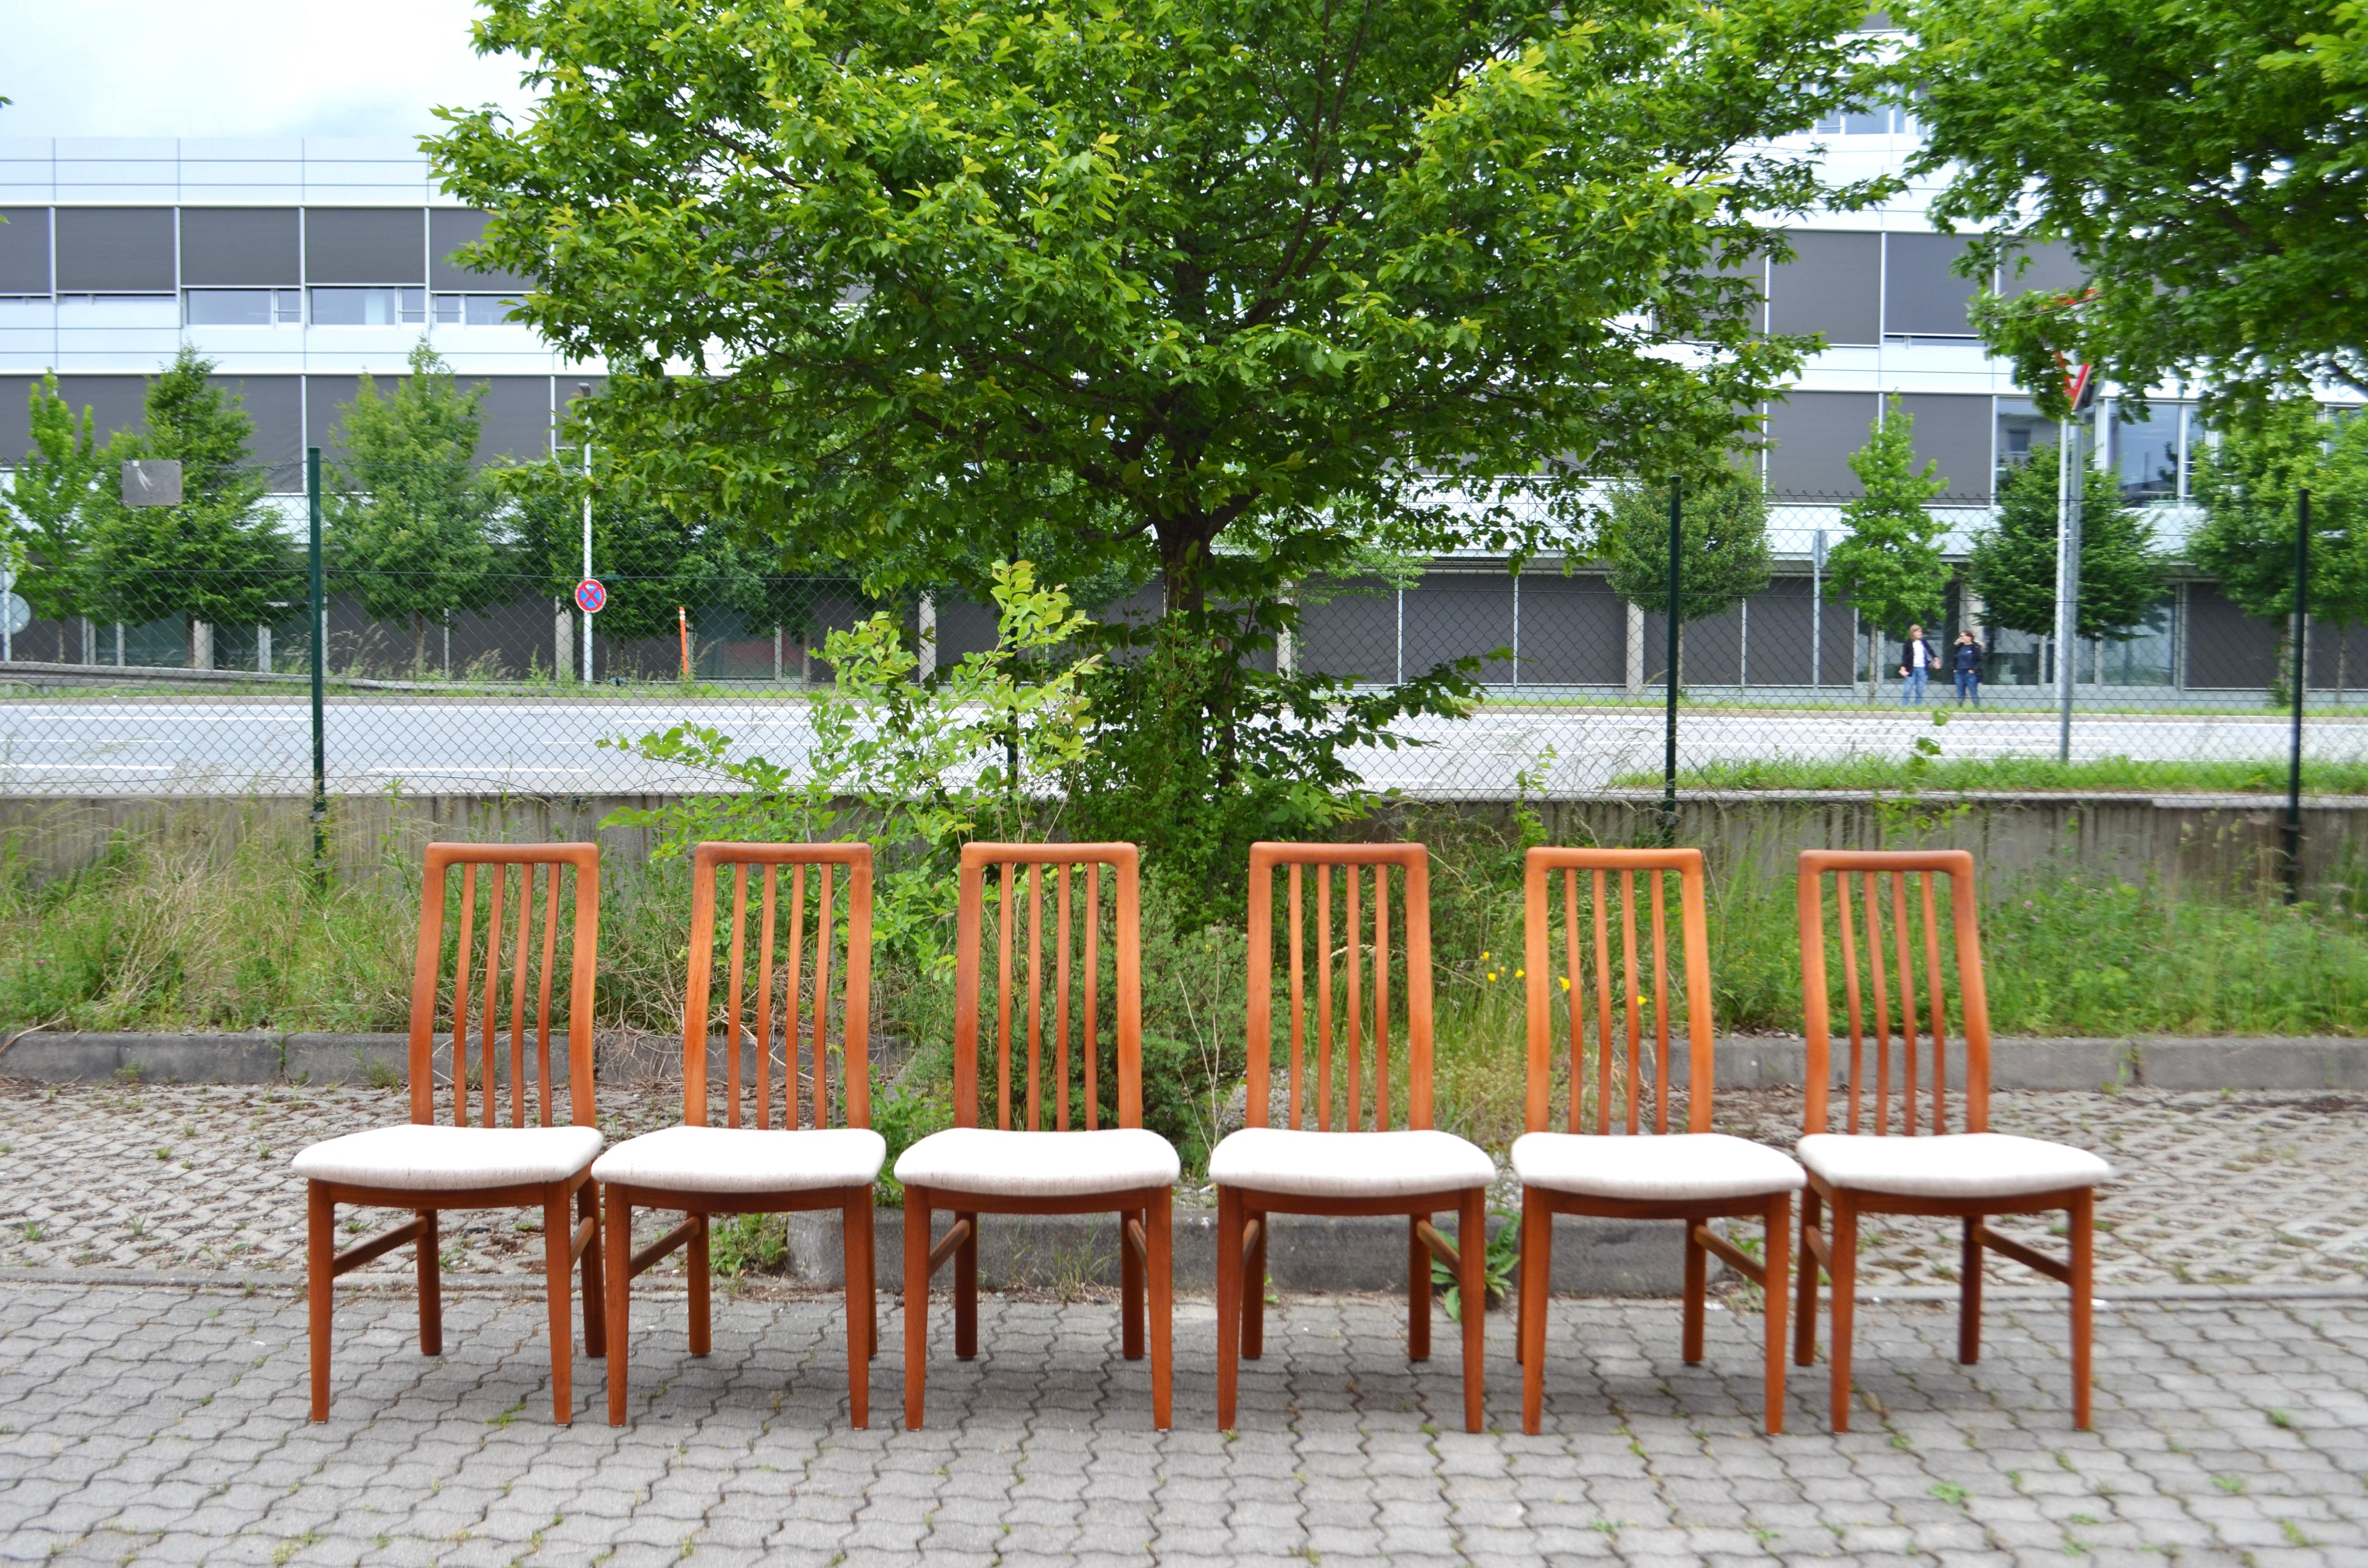 A great Danish Modern dining set.
These Danish Modern highback chairs were designed by Kai Kristiansen Modell 170 for Schou Andersen Moebelfabrik.
The backrest is thin and beautiful curved and highly comfortable.
Solid teak wood and bright ecru